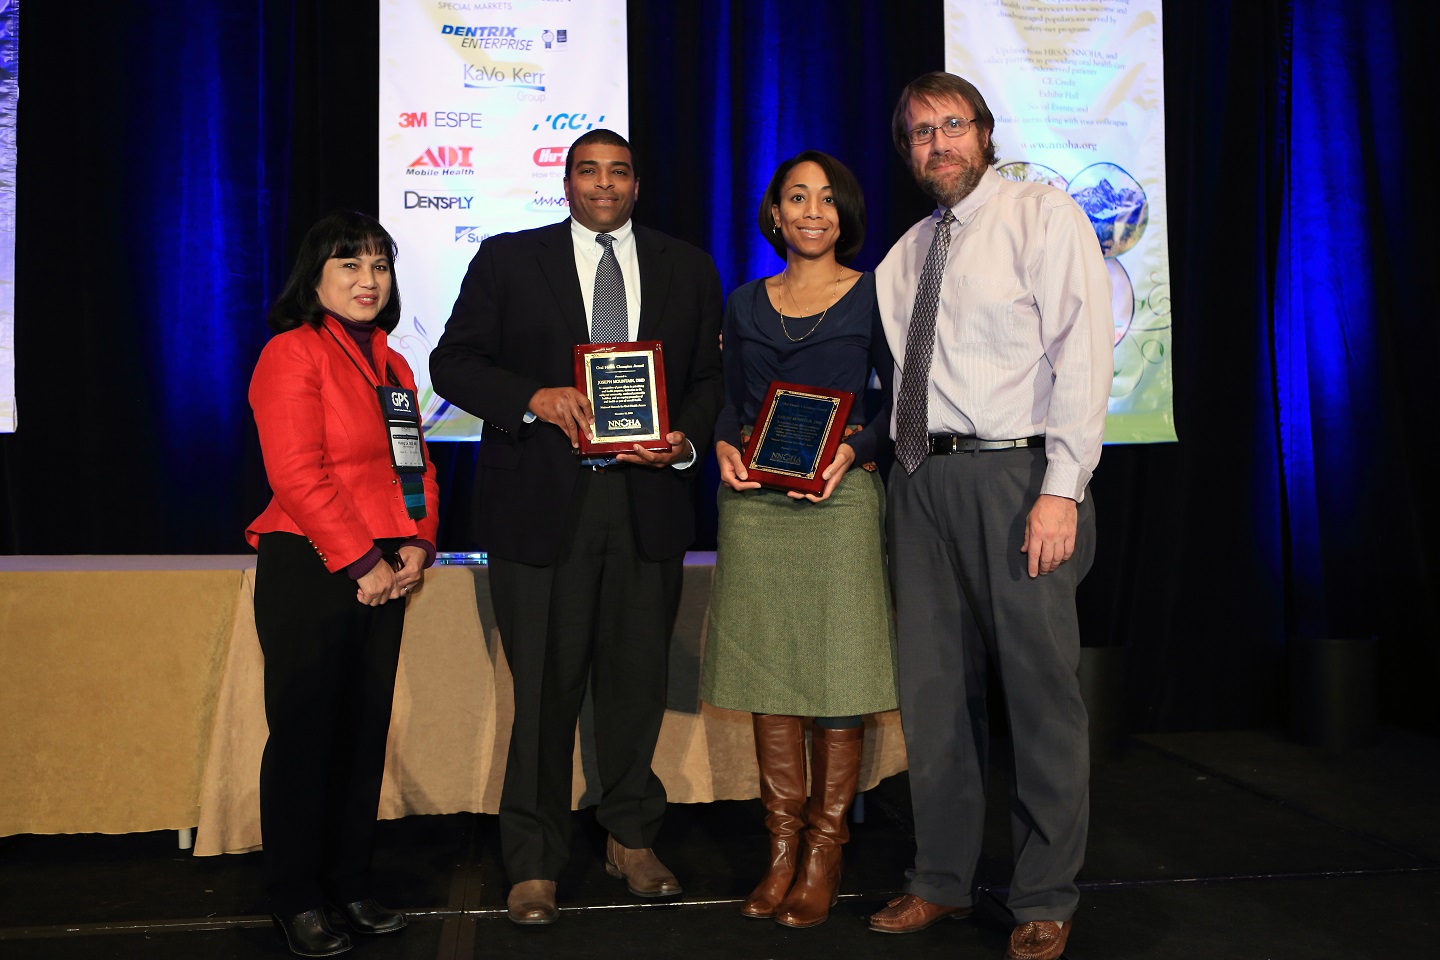 Joseph Mountain, DMD and LaJuan Mountain, DMD, Dental Directors of Family First Health, were presented with the Oral Health Champion award from the National Network for Oral Health Access (NNOHA)